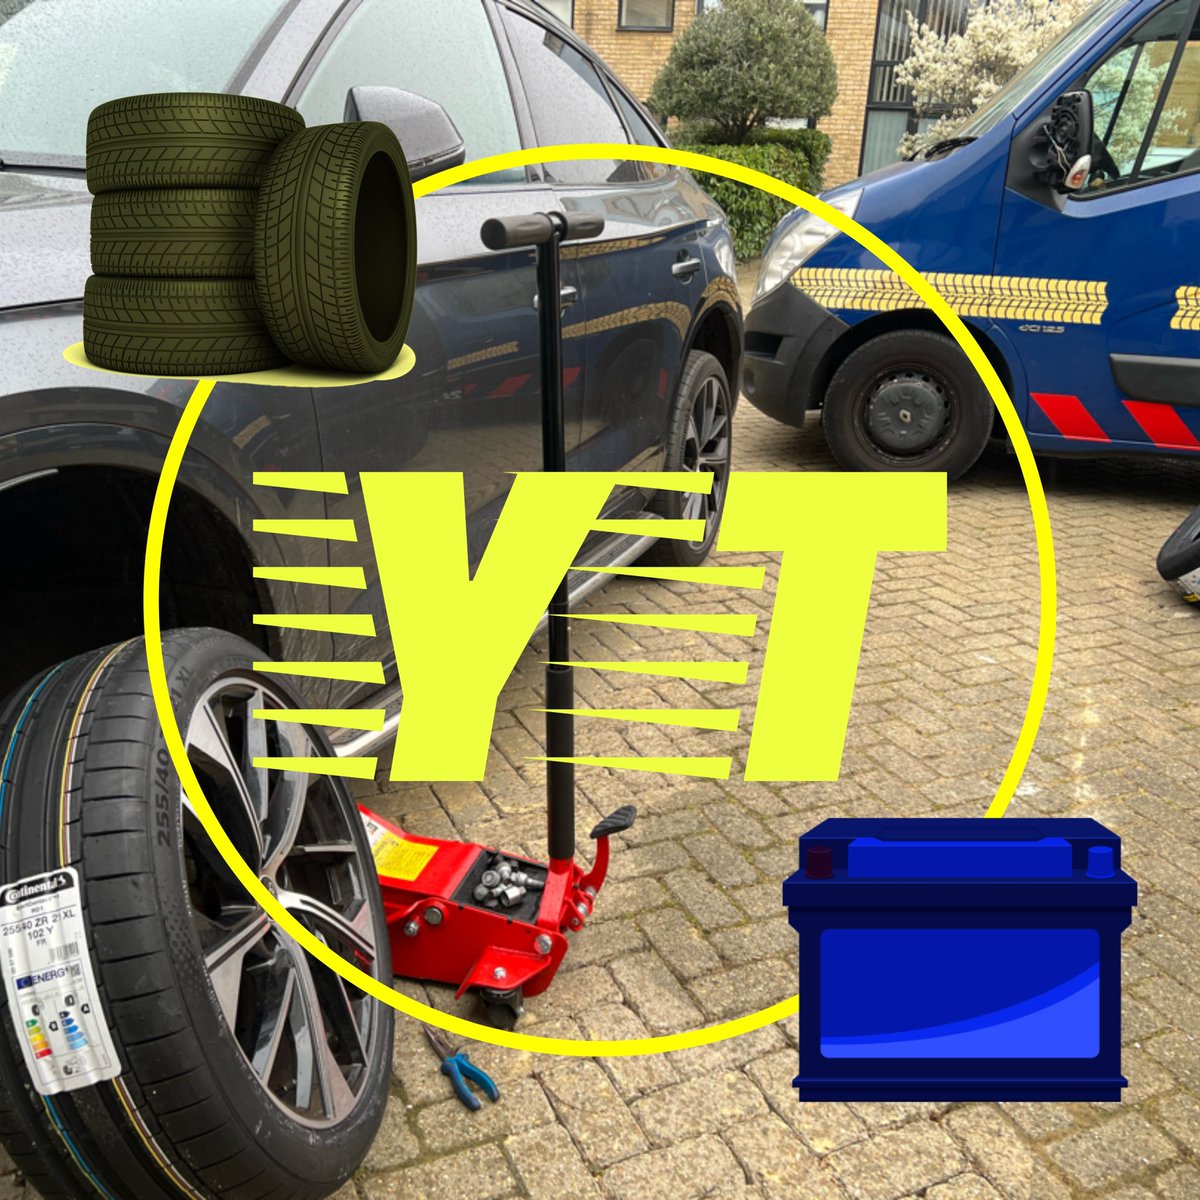 🔧 YellowTyres: Your reliable, 5-star rated emergency mobile tyre fitting solution! 🏆 Covering London, Essex & Kent, we come to you - Home, Work or Roadside. 🛣️ Just search 'Mobile Tyre Near Me' or dial 0203 633 9333 anytime! #YellowTyres #TyreFitting